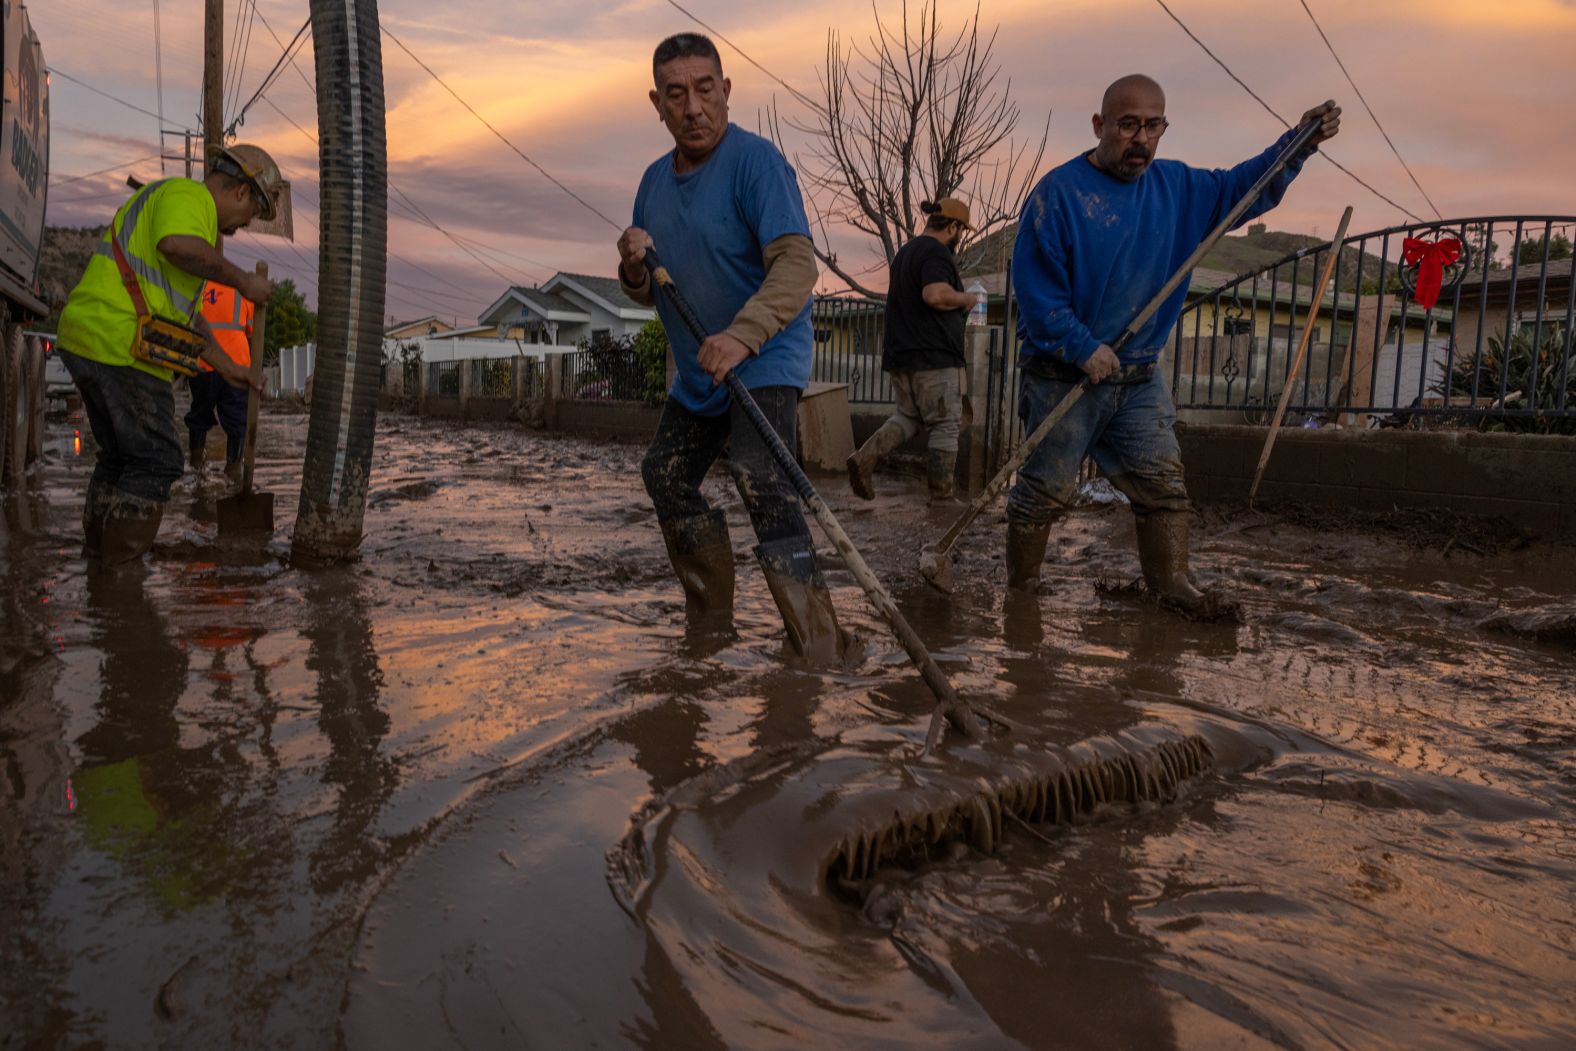 Residents in Piru, California, work to push back wet mud that trapped cars and invaded some houses on Wednesday, January 11. <a href="index.php?page=&url=https%3A%2F%2Fwww.cnn.com%2F2023%2F01%2F10%2Fweather%2Fgallery%2Fcalifornia-weather-flooding%2Findex.html" target="_blank">See more photos from the flooding in California</a>.